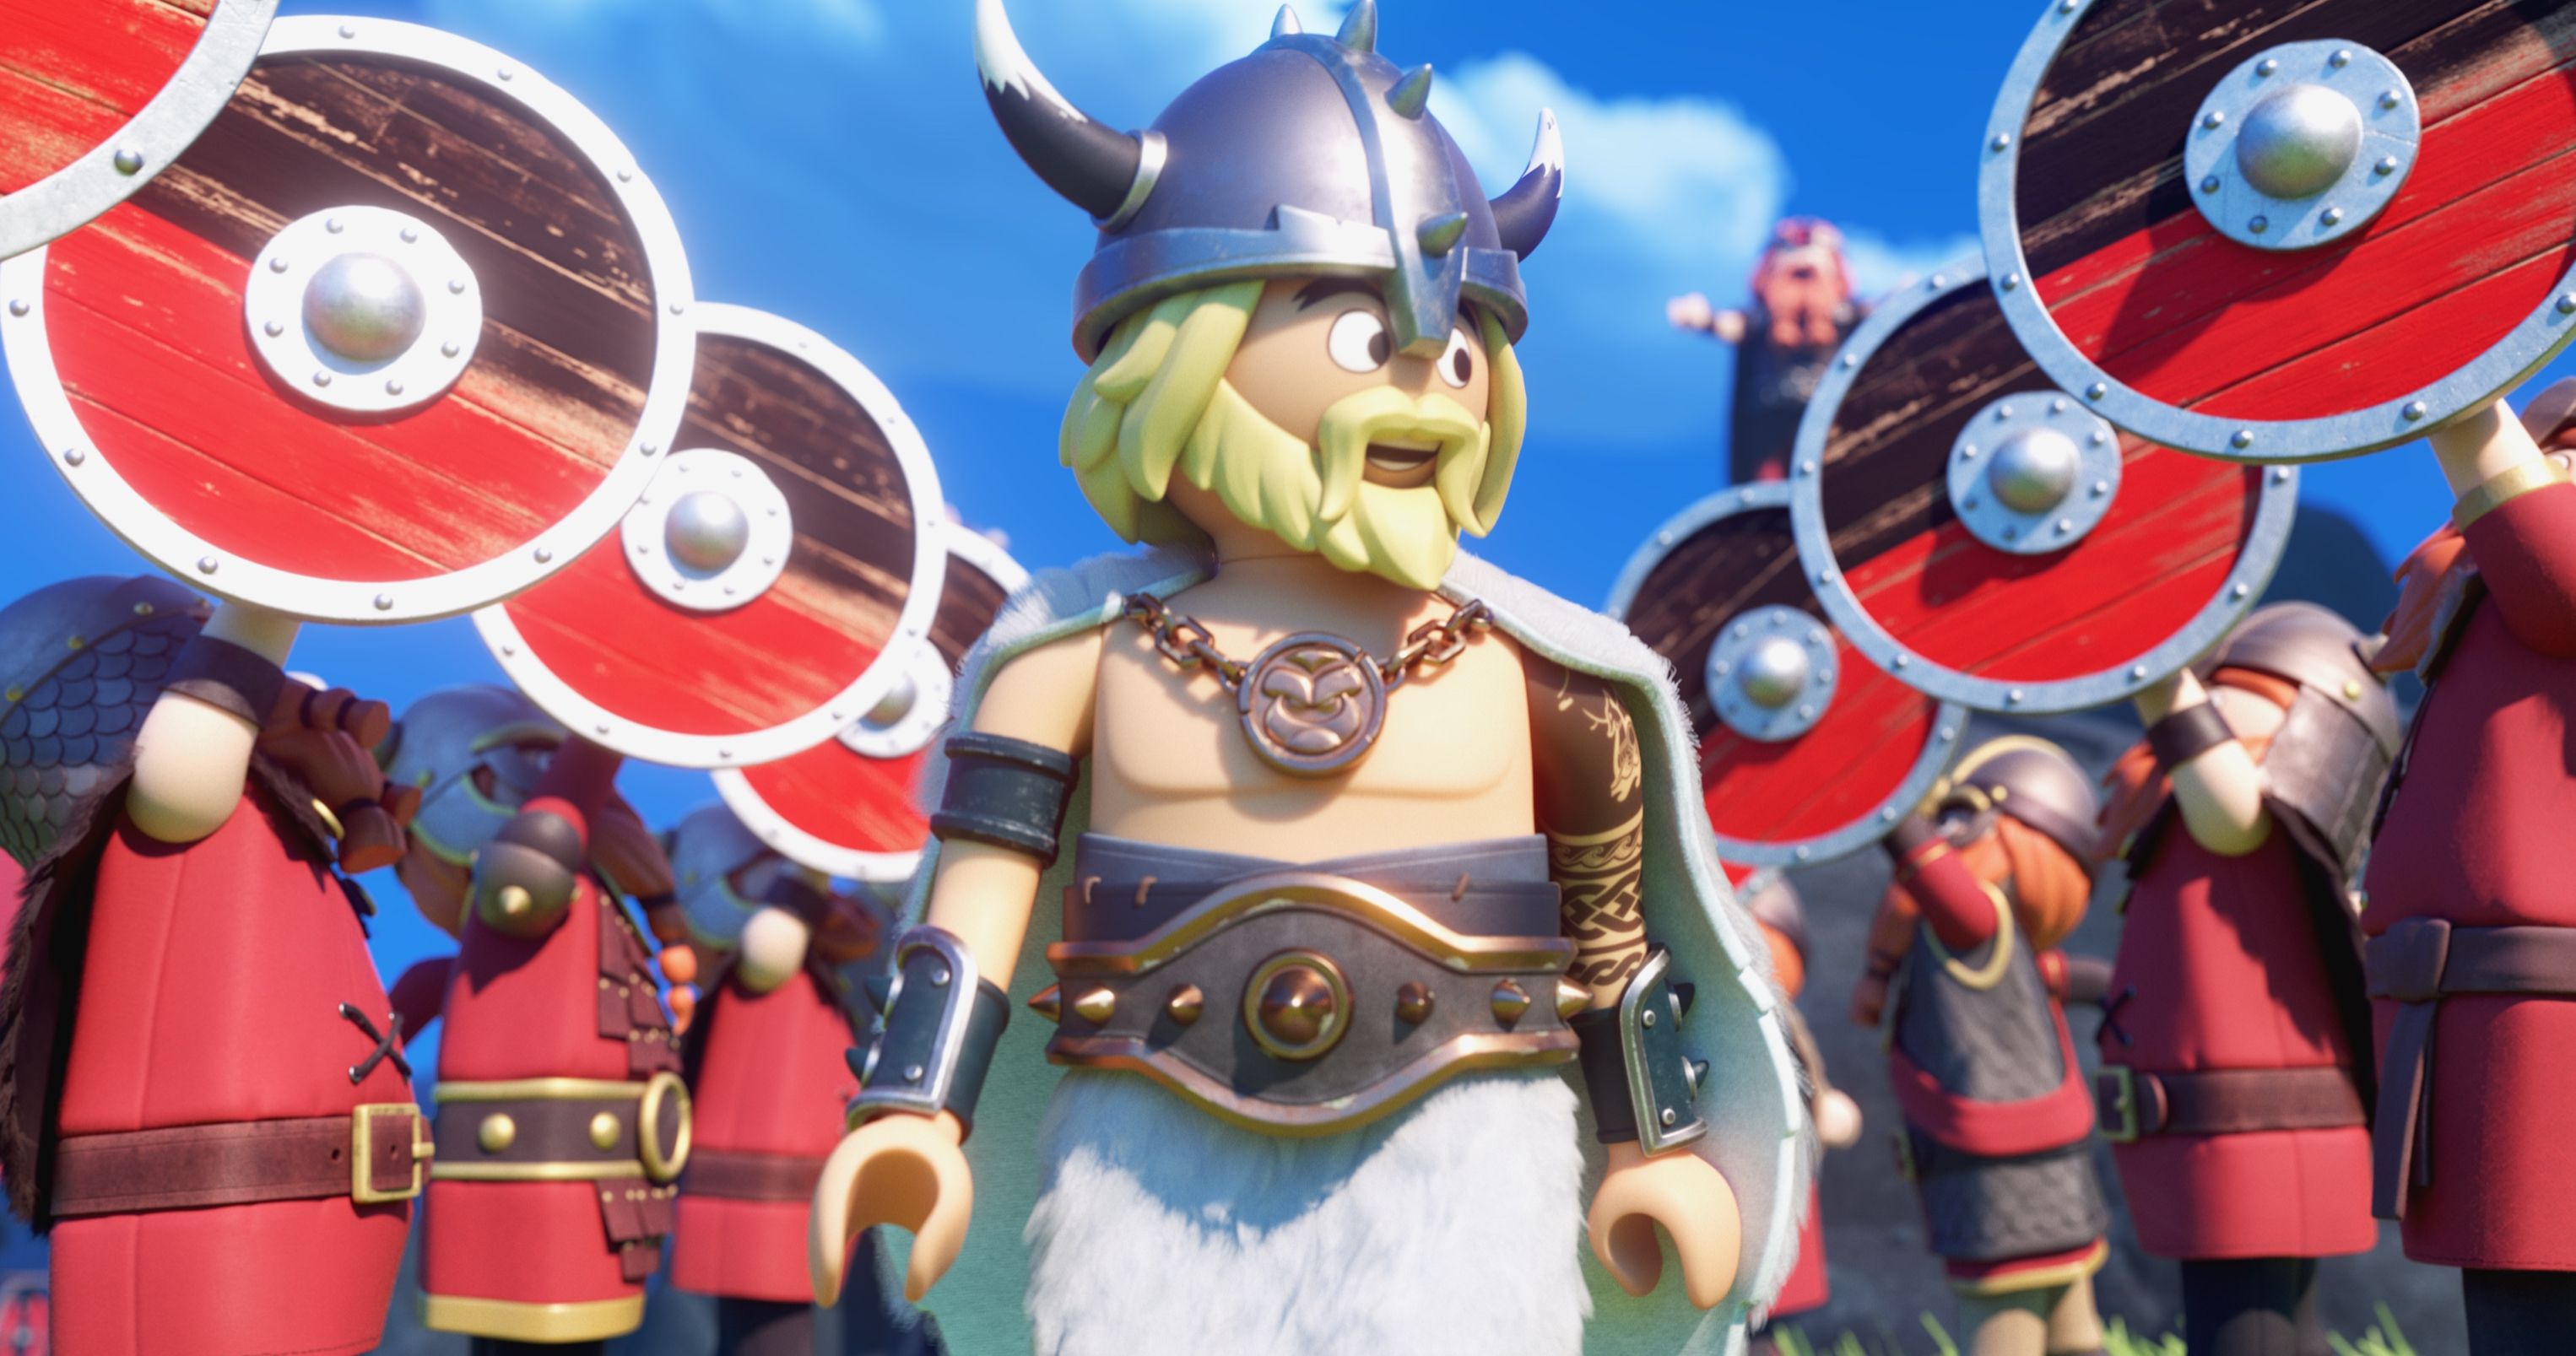 PlayMobil the Movie Trailer #3 Brings Epic-Sized Adventure for Tiny Toys